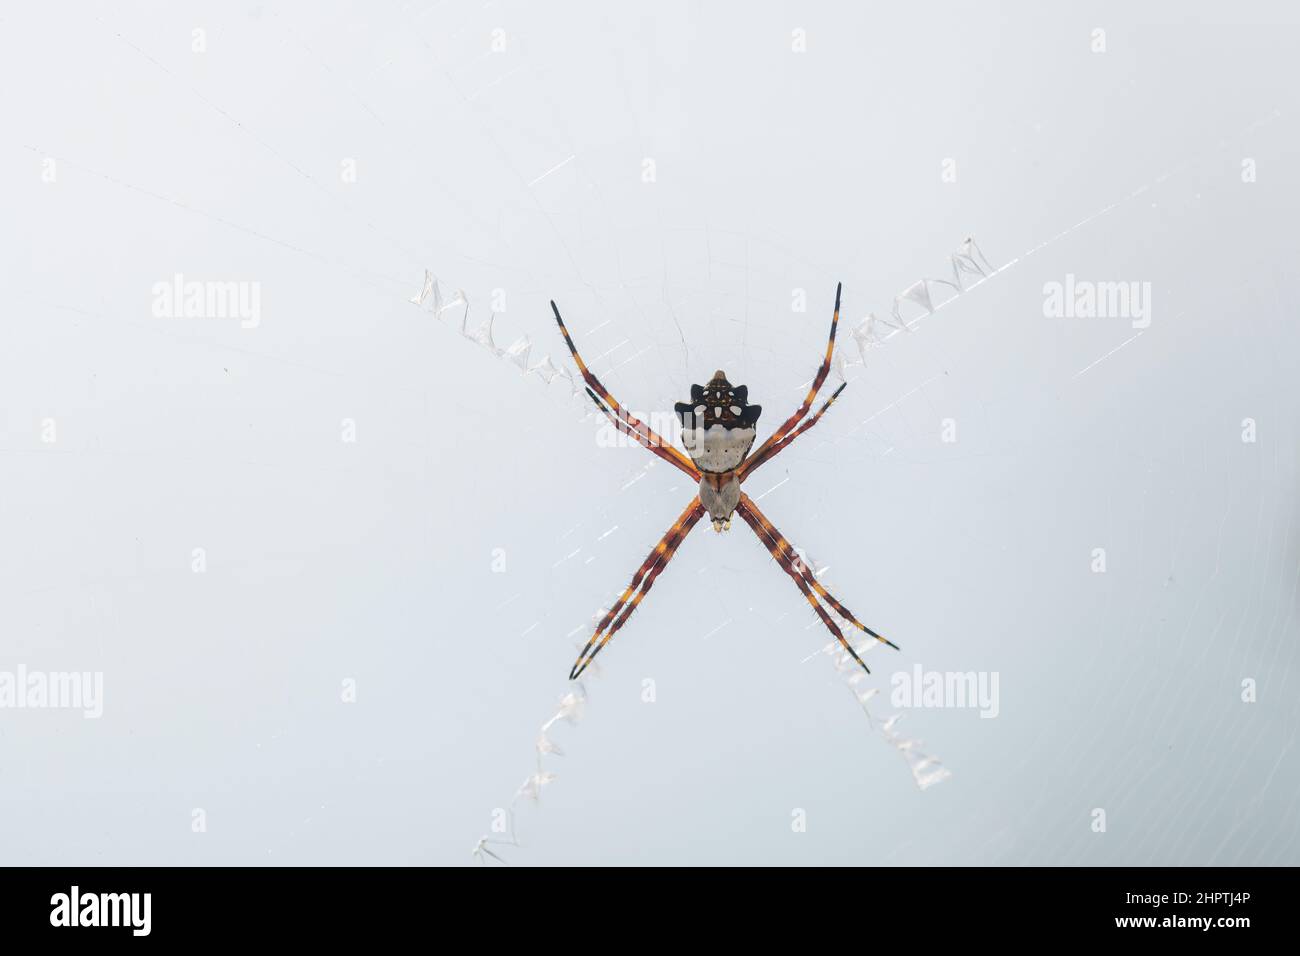 A Silver Garden Spider (Argiope argentata) on its web in the Florida Keys, USA. Stock Photo